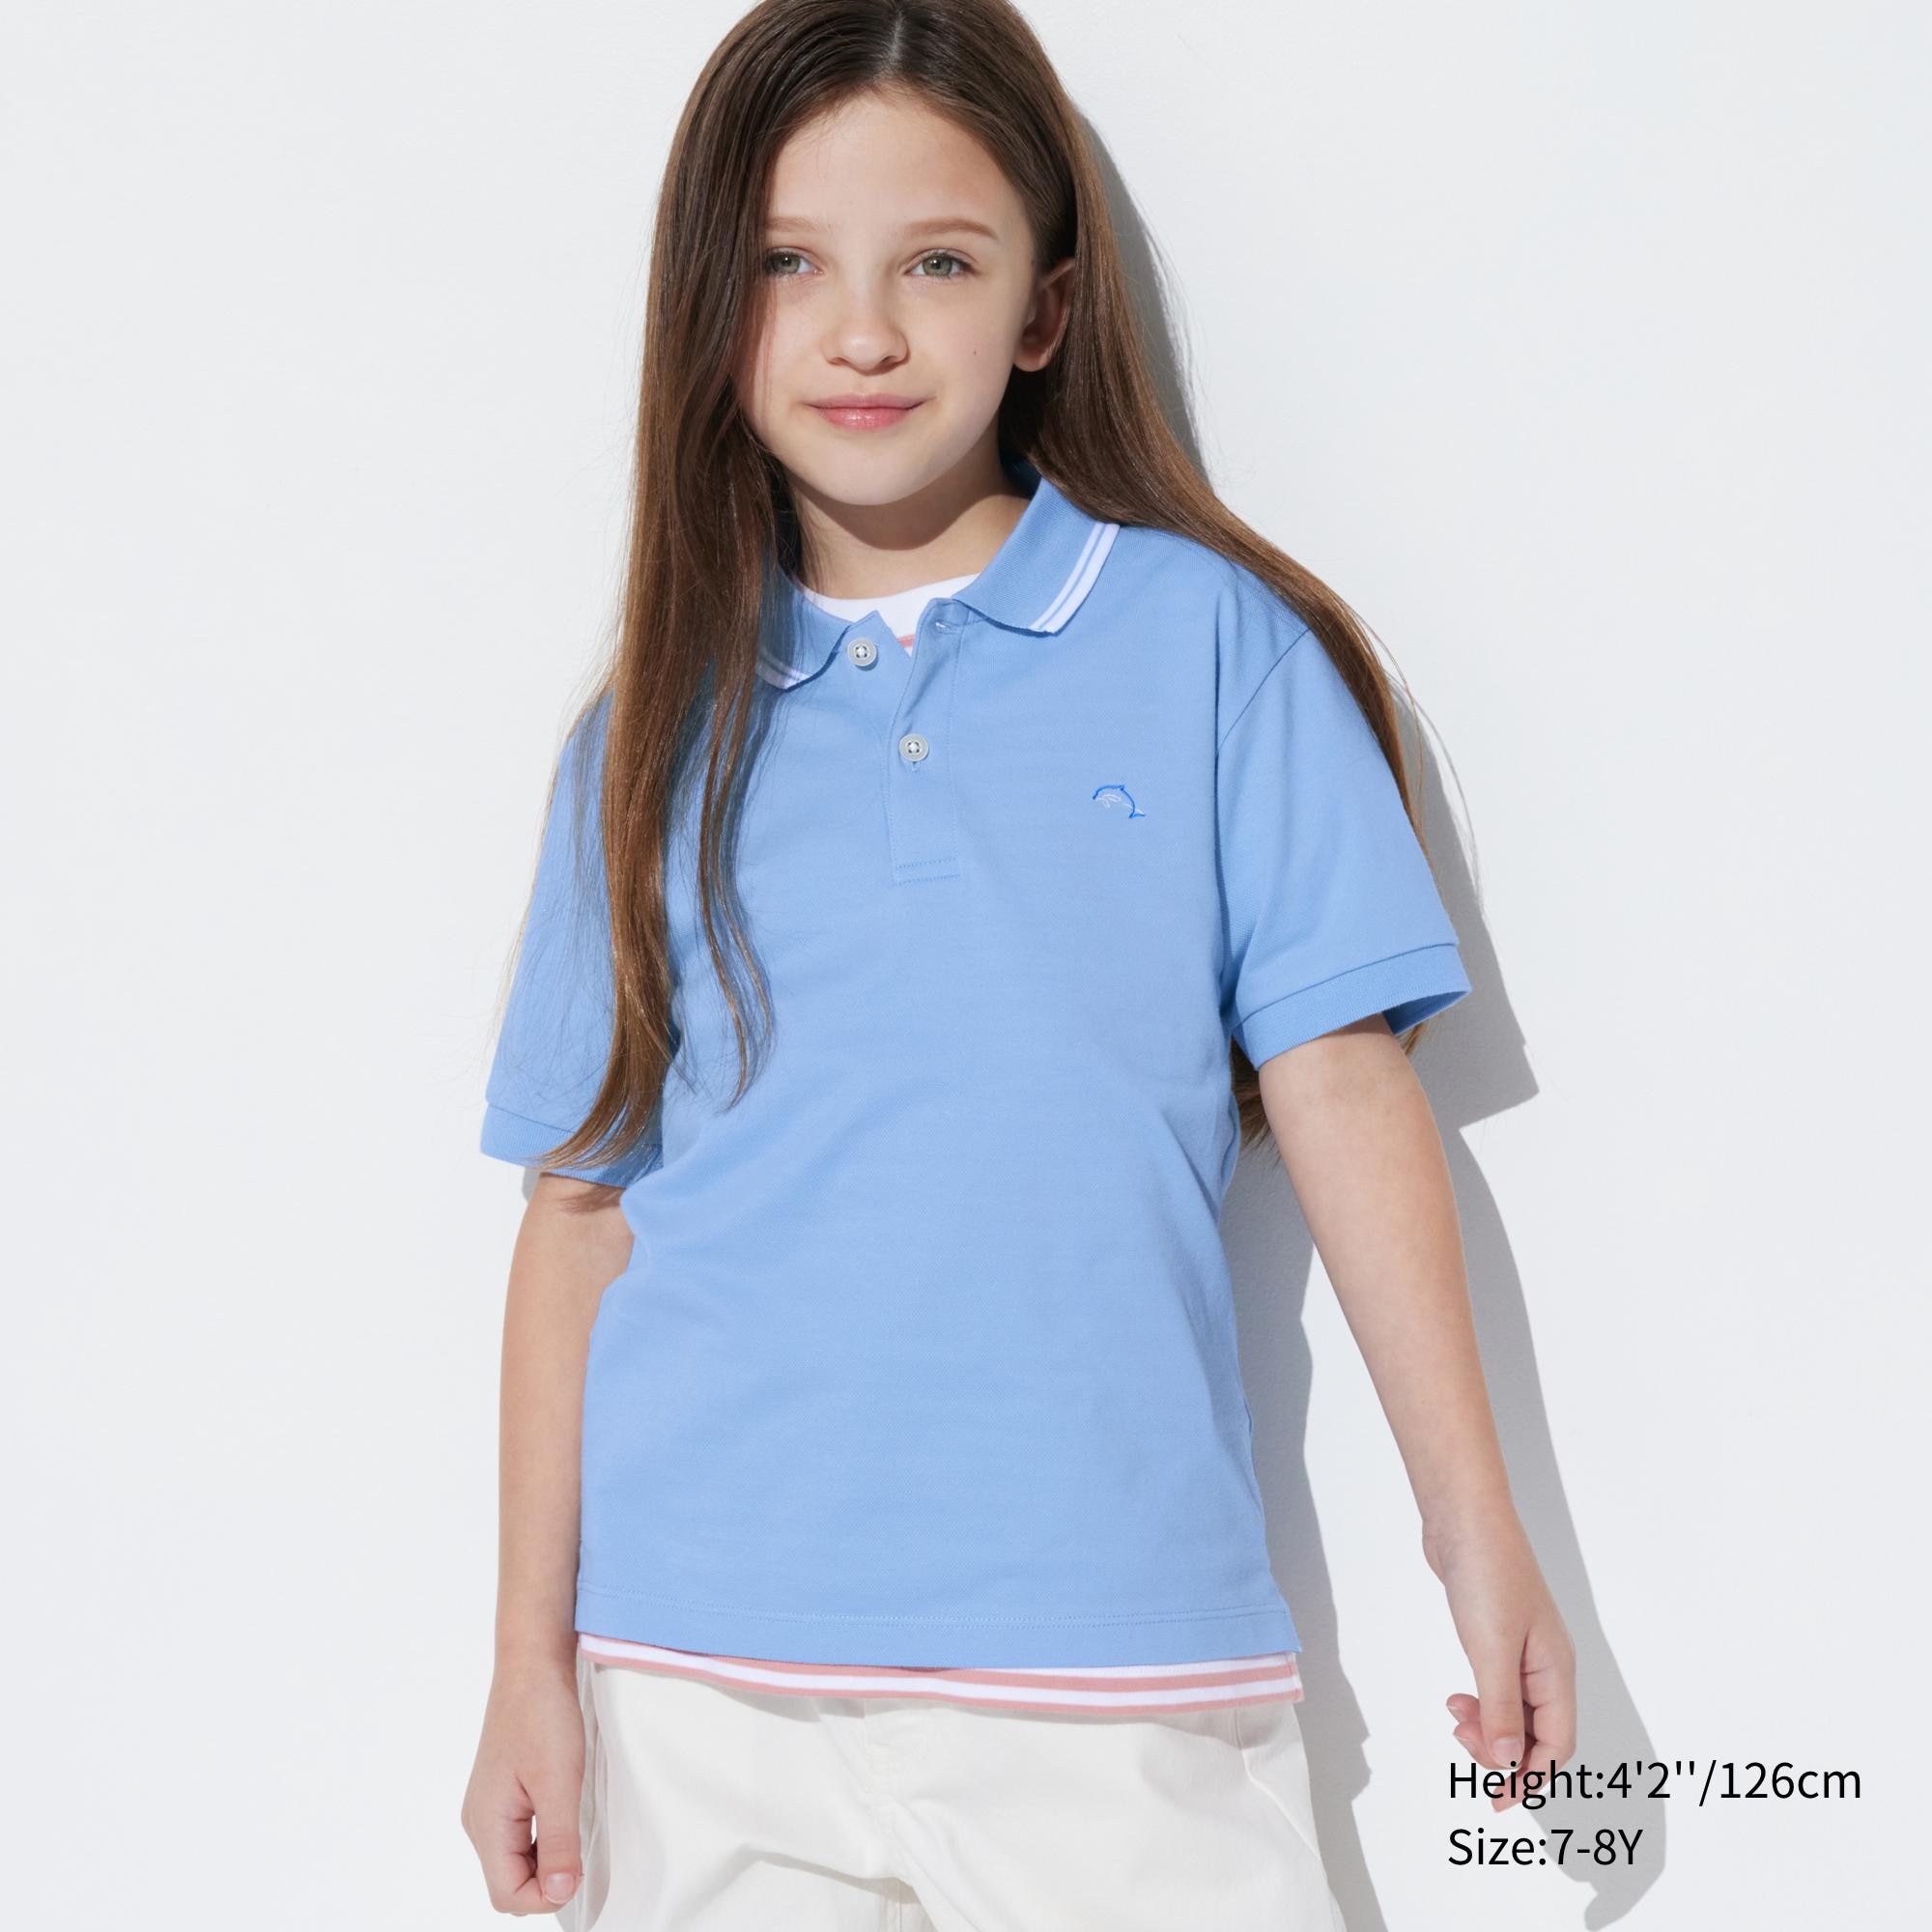 Dry Pique Embroidered Polo Shirt